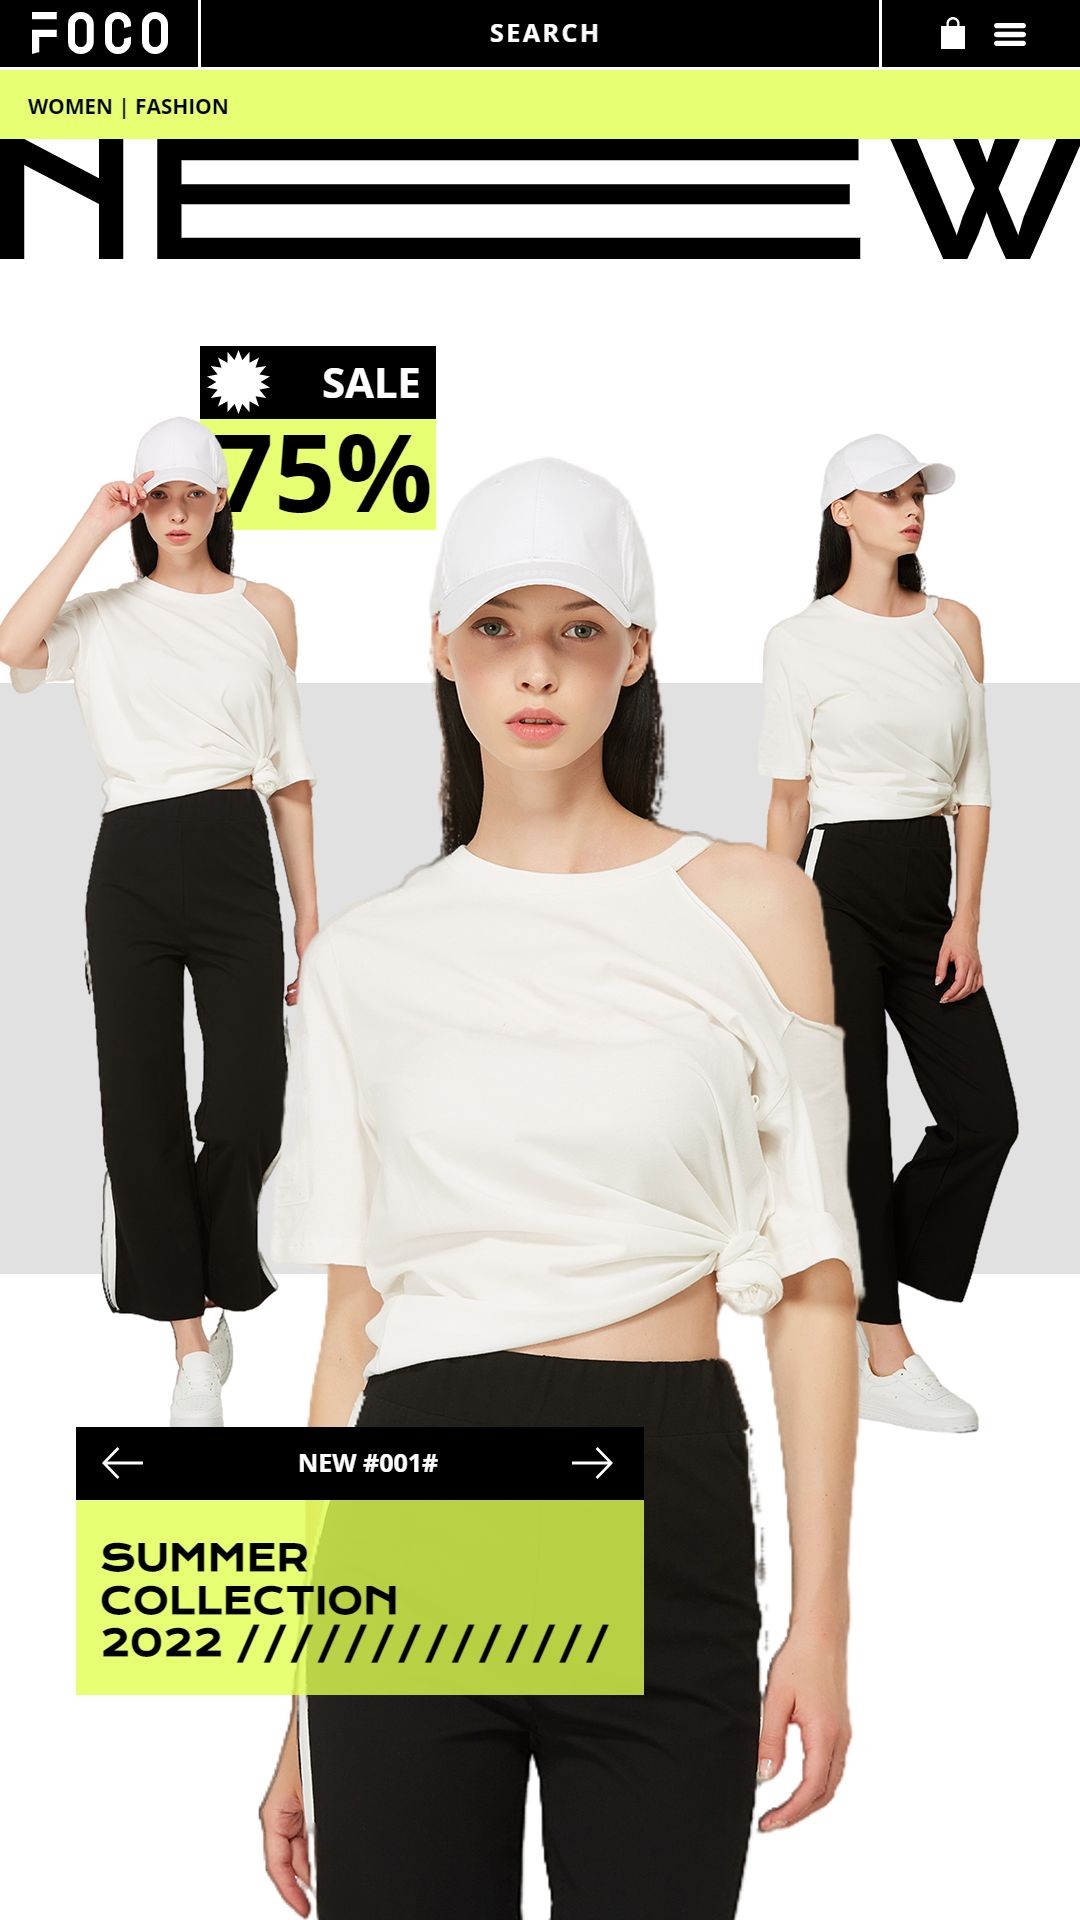 Women's Fashion Clothing Shop the Look OOTD Website Simulation Discount Sale Promo New Arrival Ecommerce Story预览效果